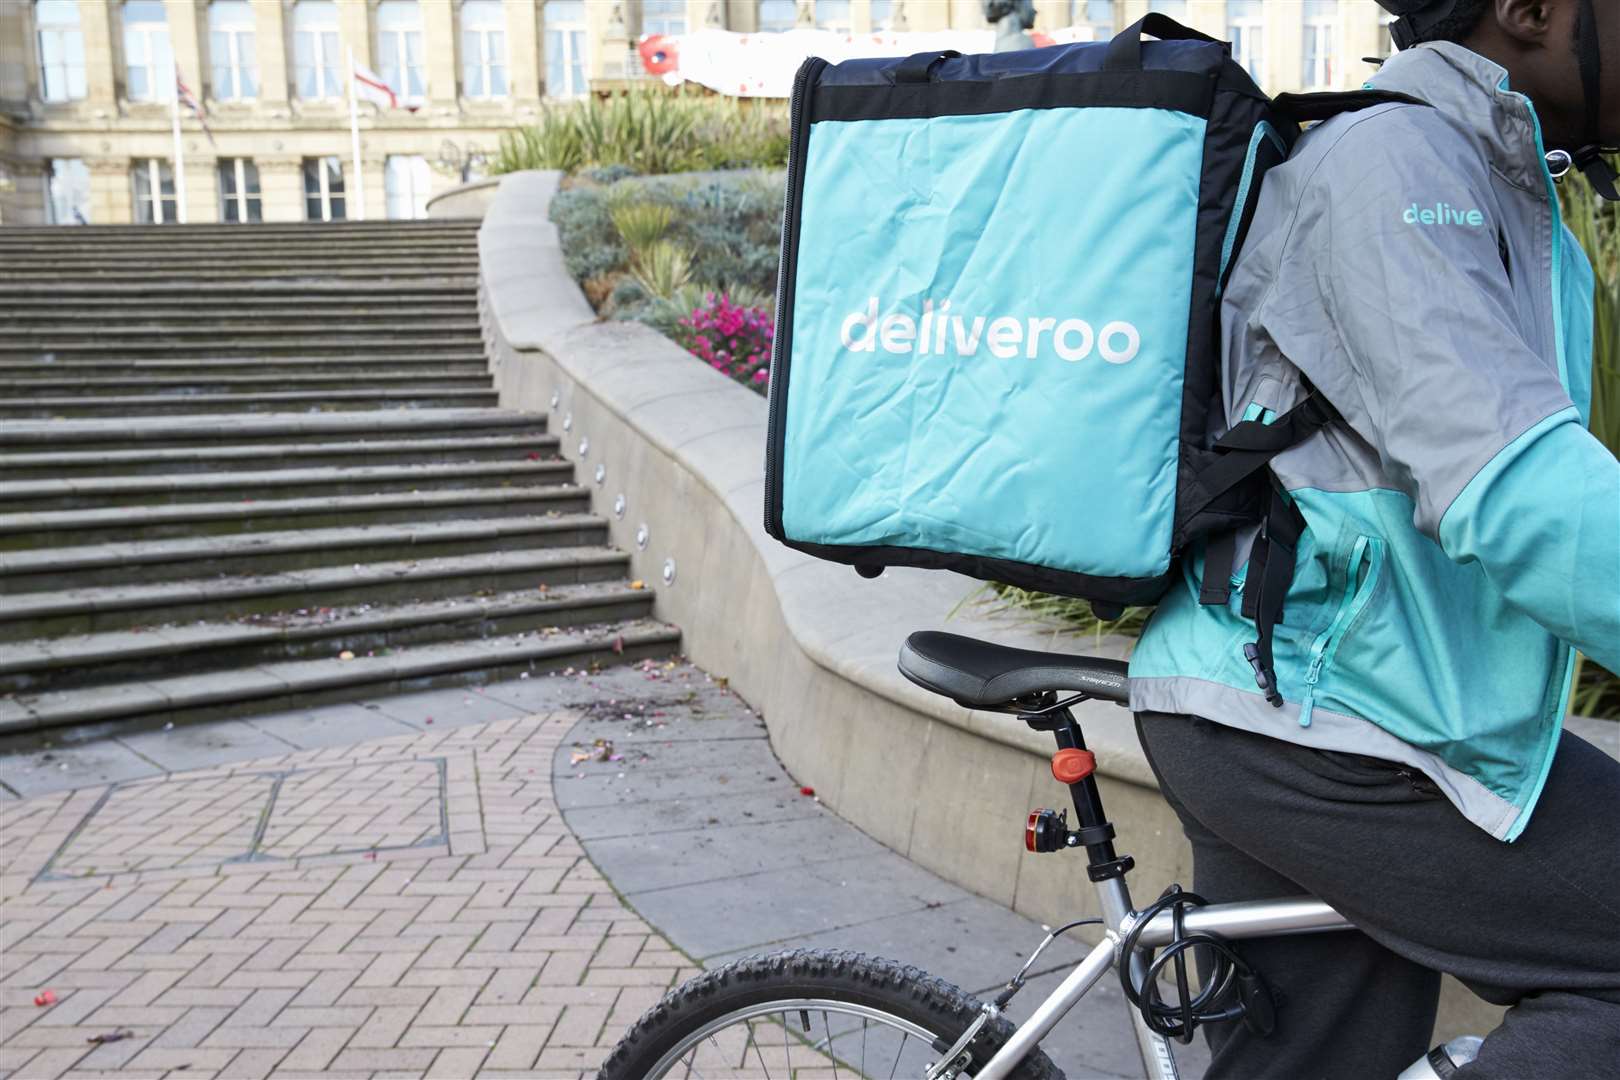 The delivery service is already established in a few Kent towns. Picture: Deliveroo (1234441)